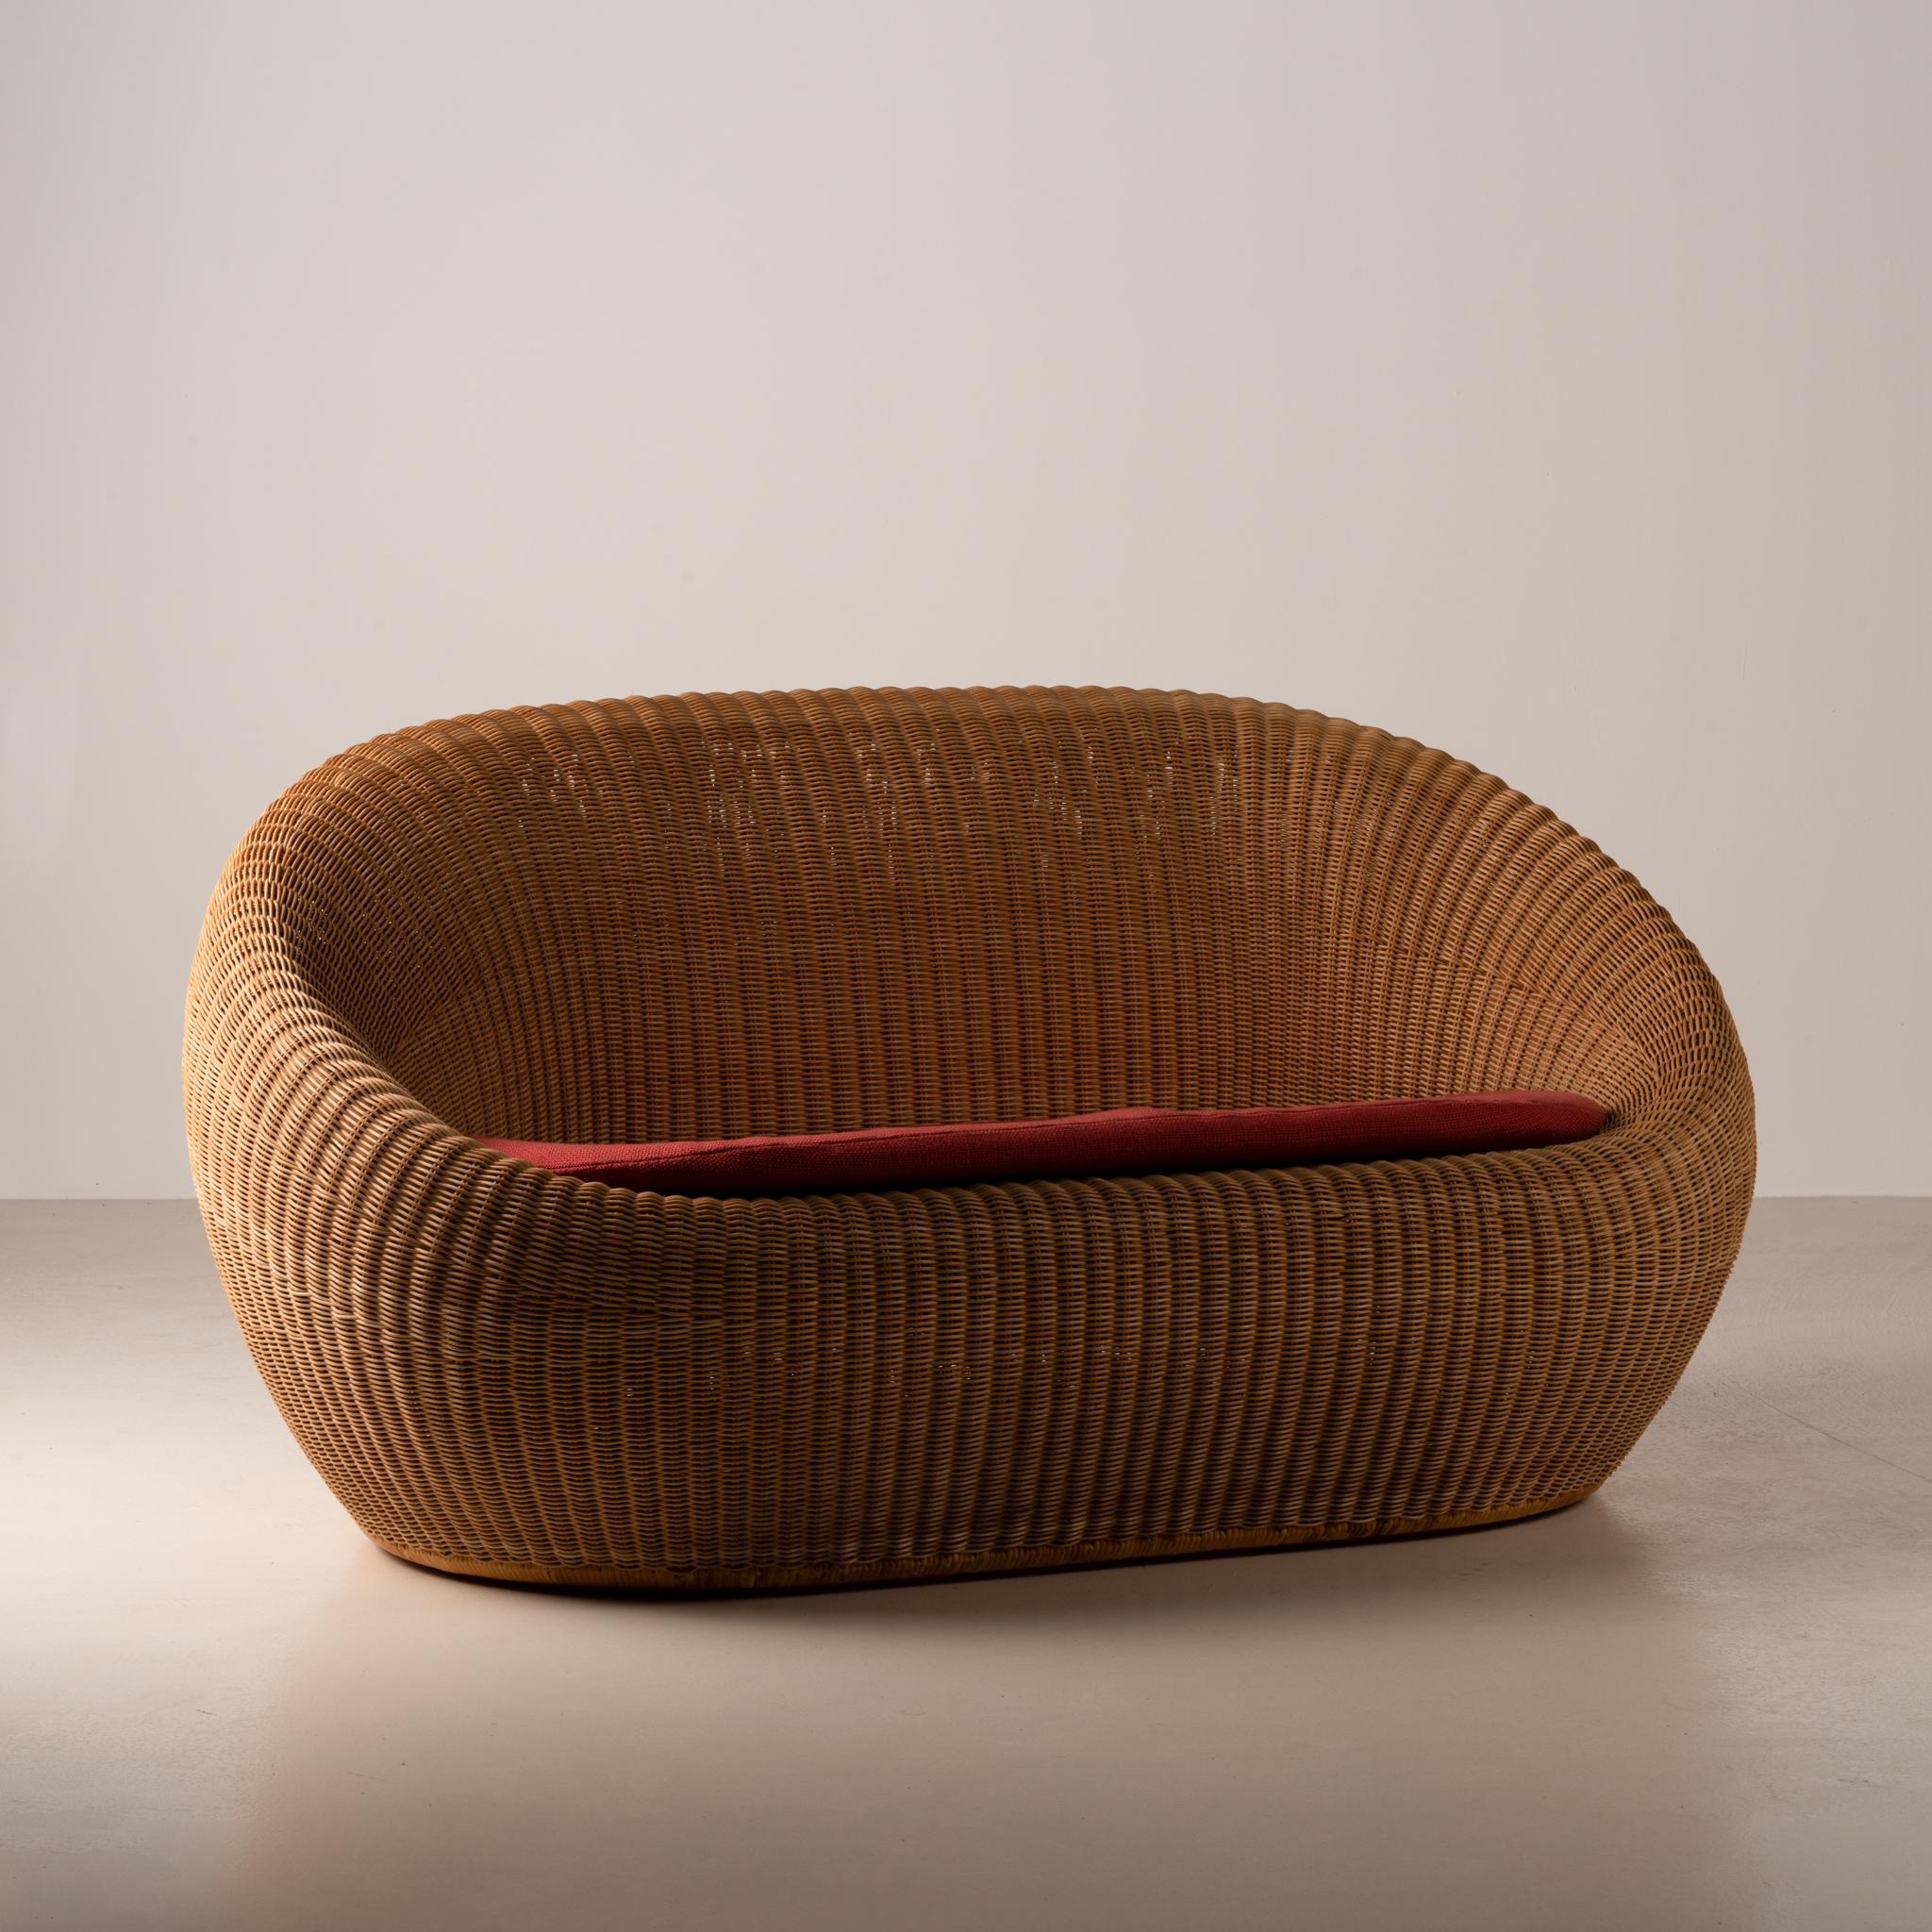 This rattan Sofa was designed  by Isamu Kenmochi  circa 1960s. It is part of the iconic “Rattan  Furniture” series manufactured by Yamakawa Rattan.

No restorations or modifications have been made. 

Rattan and Upholstery


PH: Dario Borruto